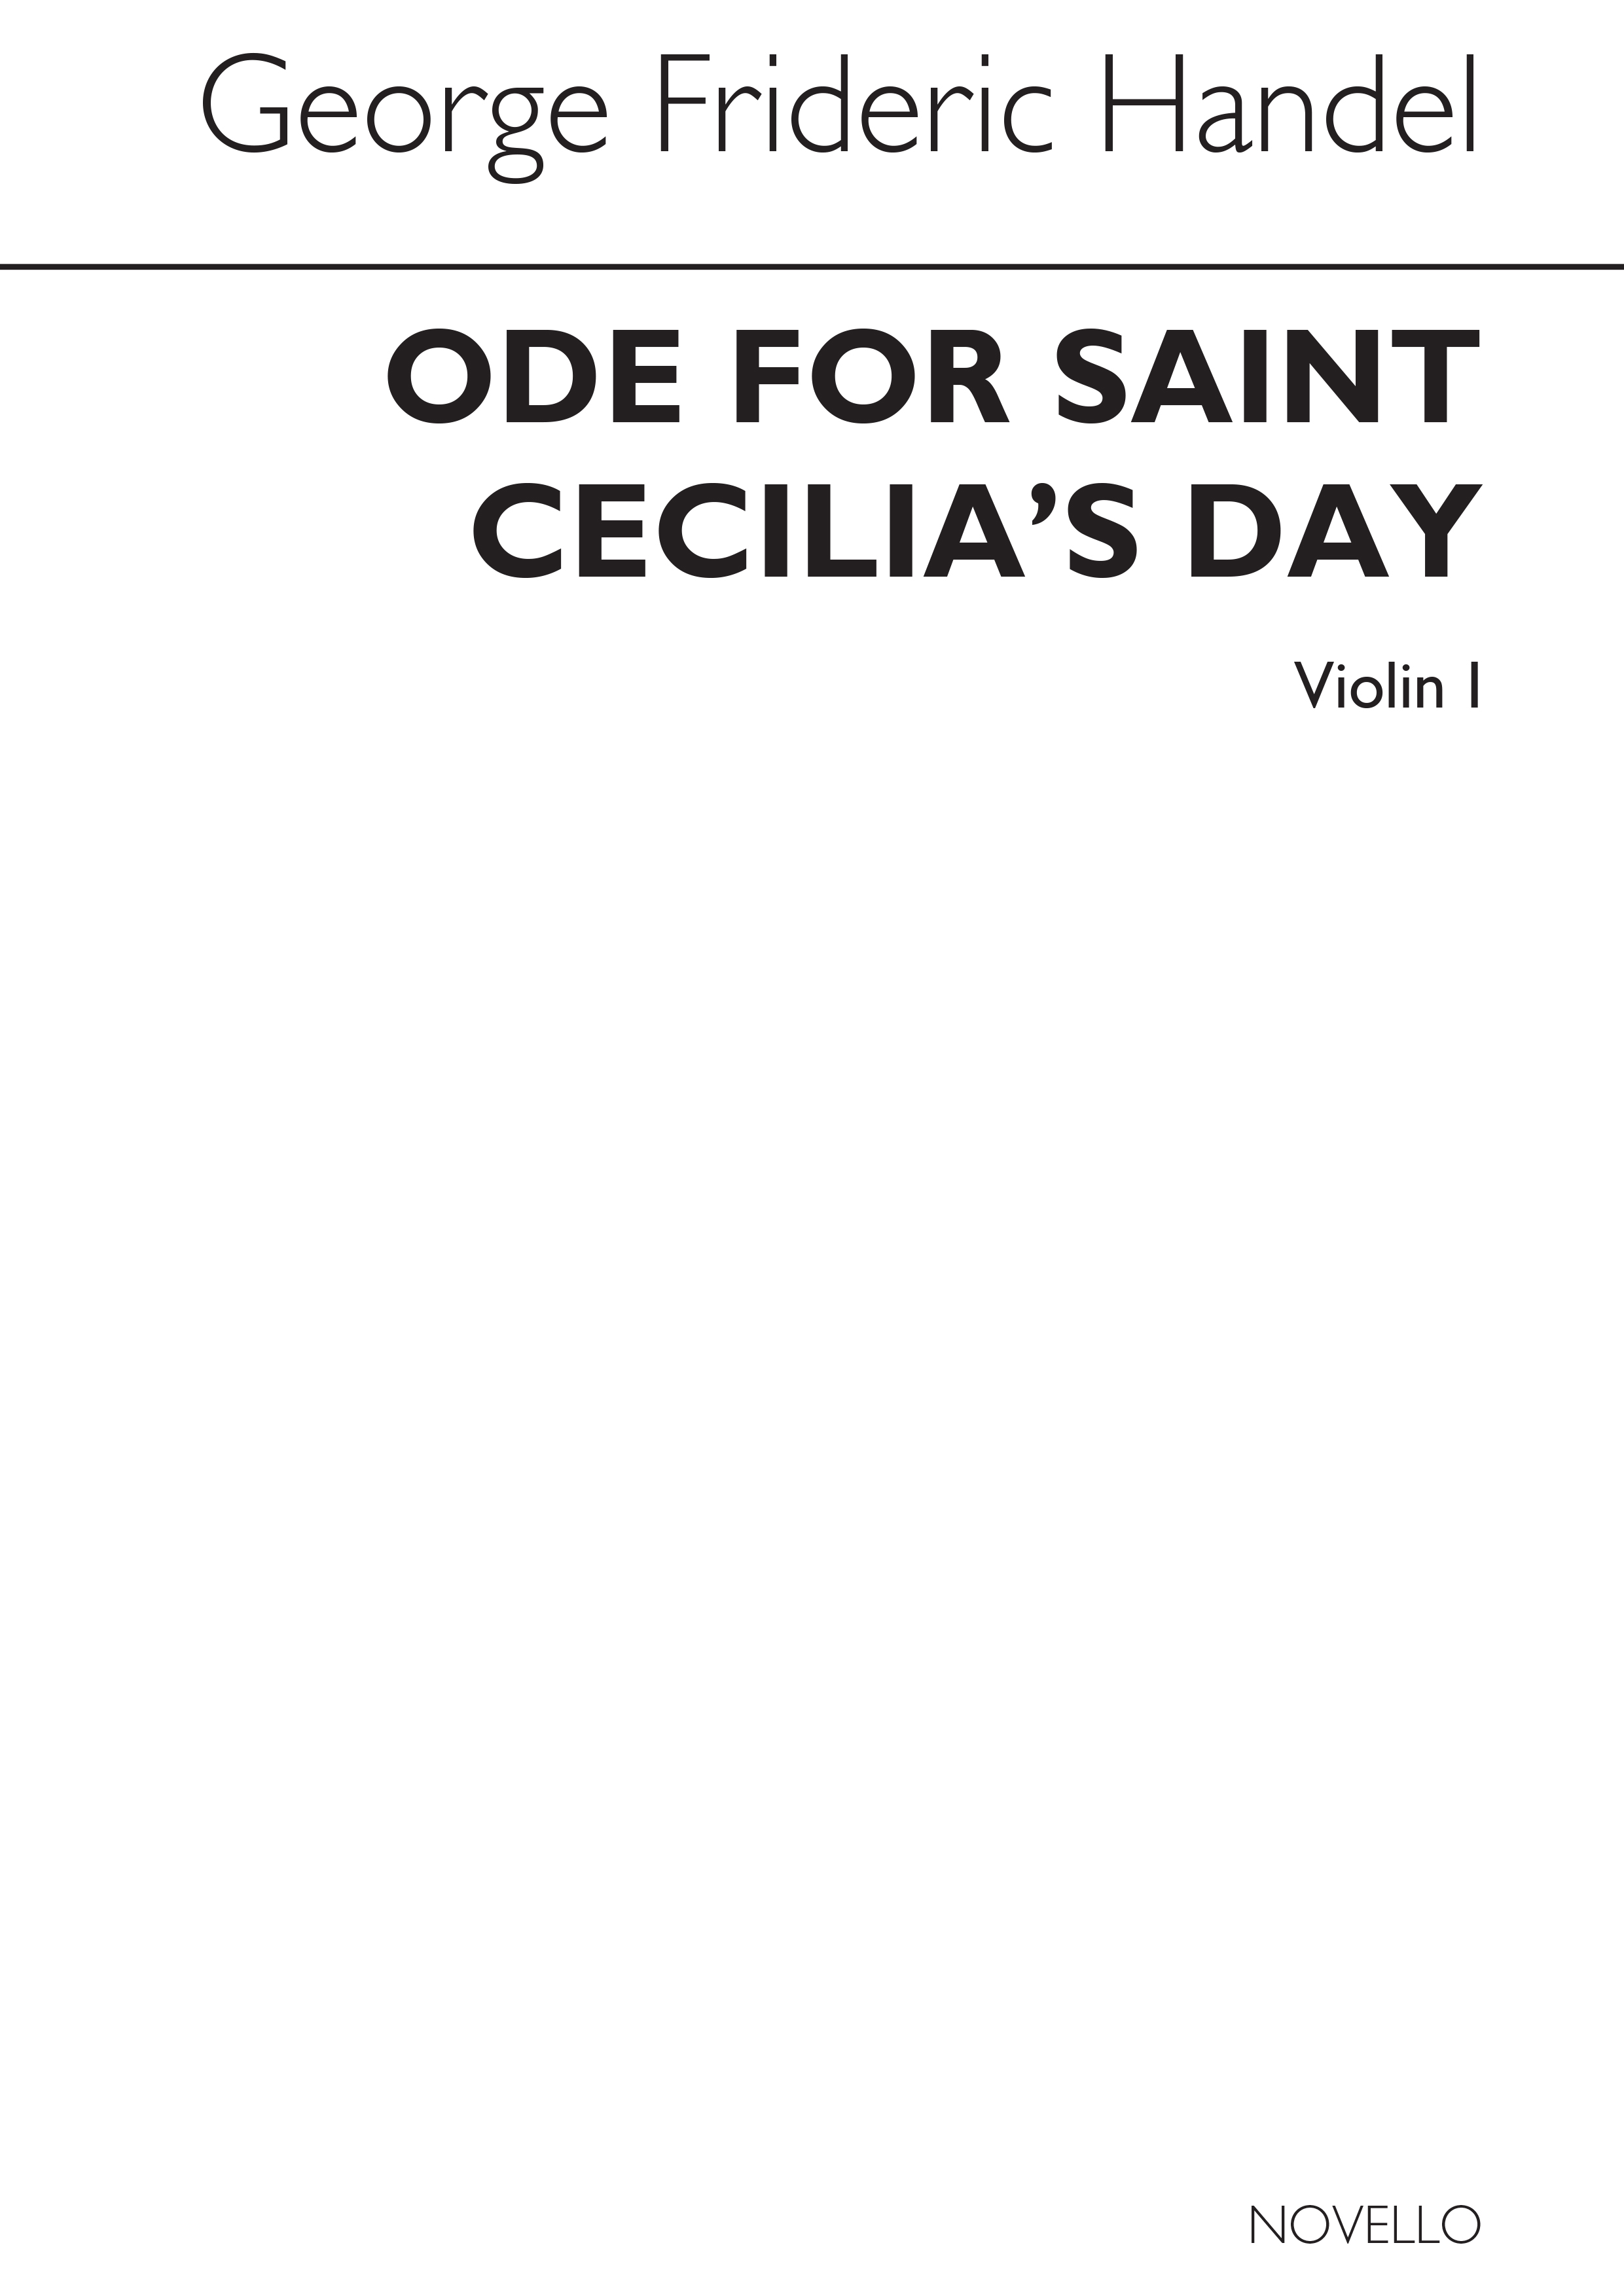 Georg Friedrich Hndel: Ode For Saint Cecilia's Day: Violin: Part